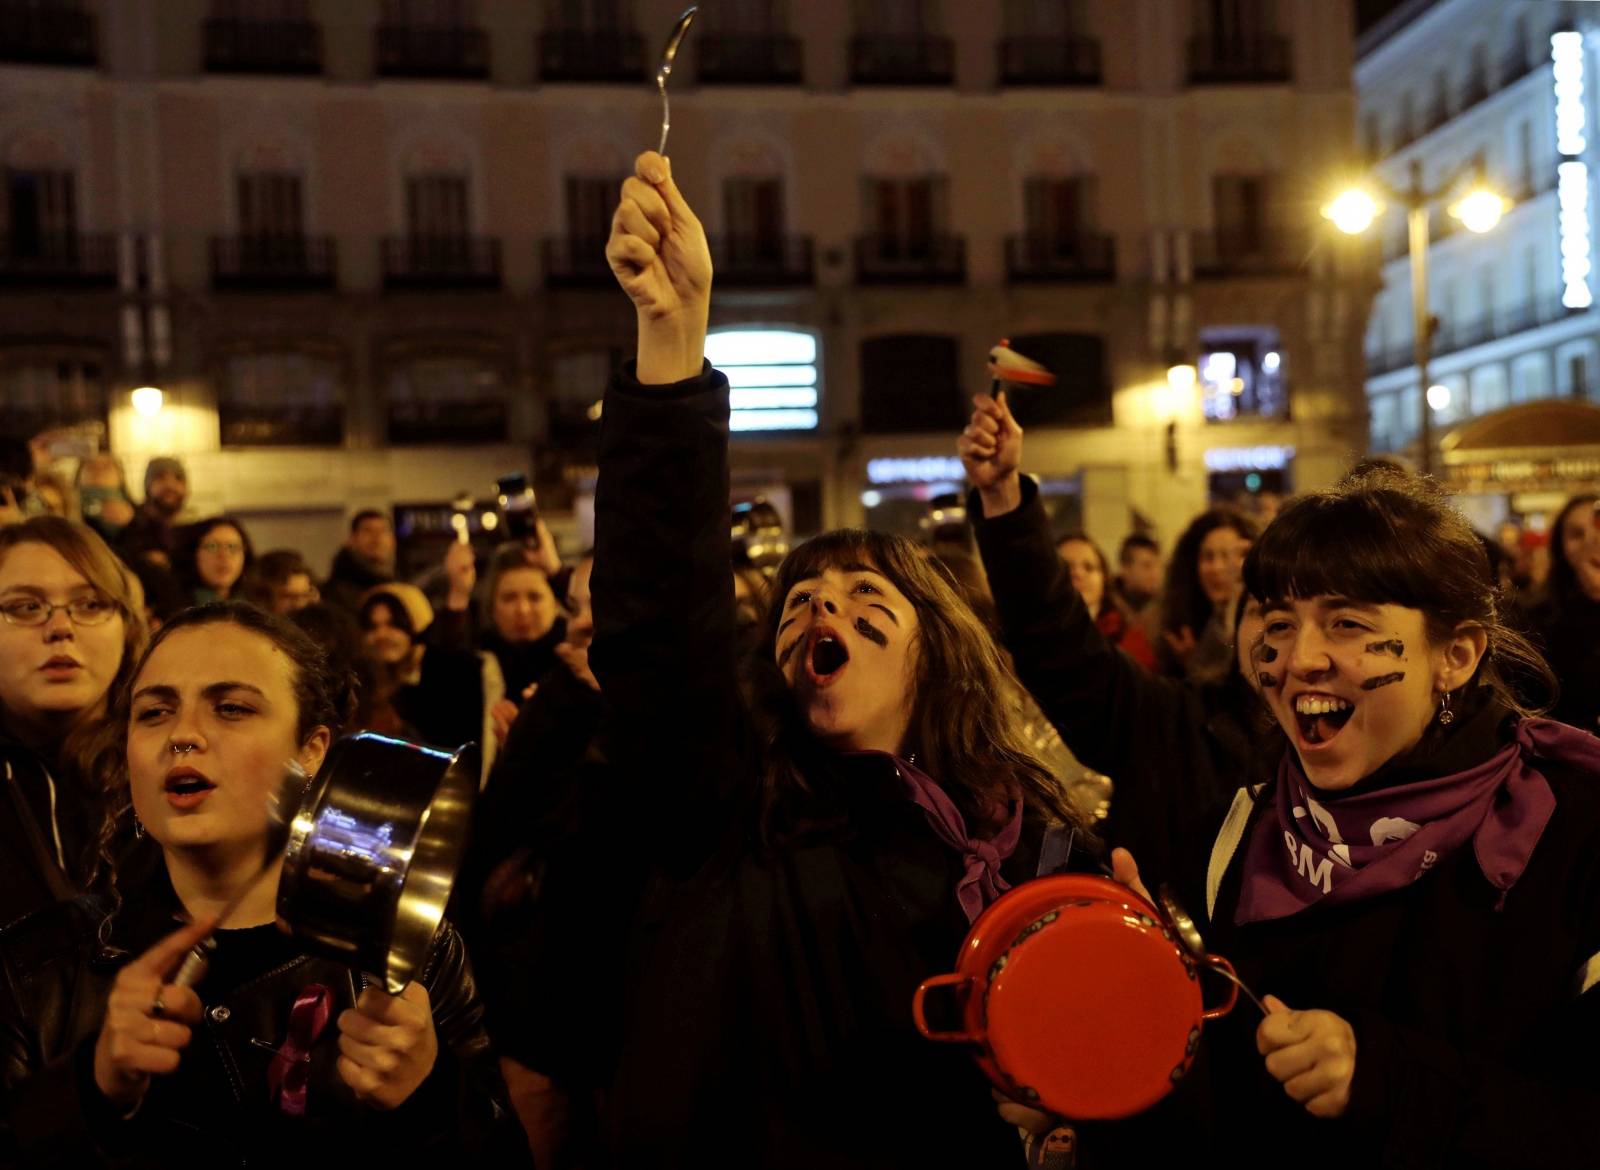 Women bang pots and pans during a protest at the start of a nationwide feminist strike on International Women's Day at Puerta del Sol Square in Madrid